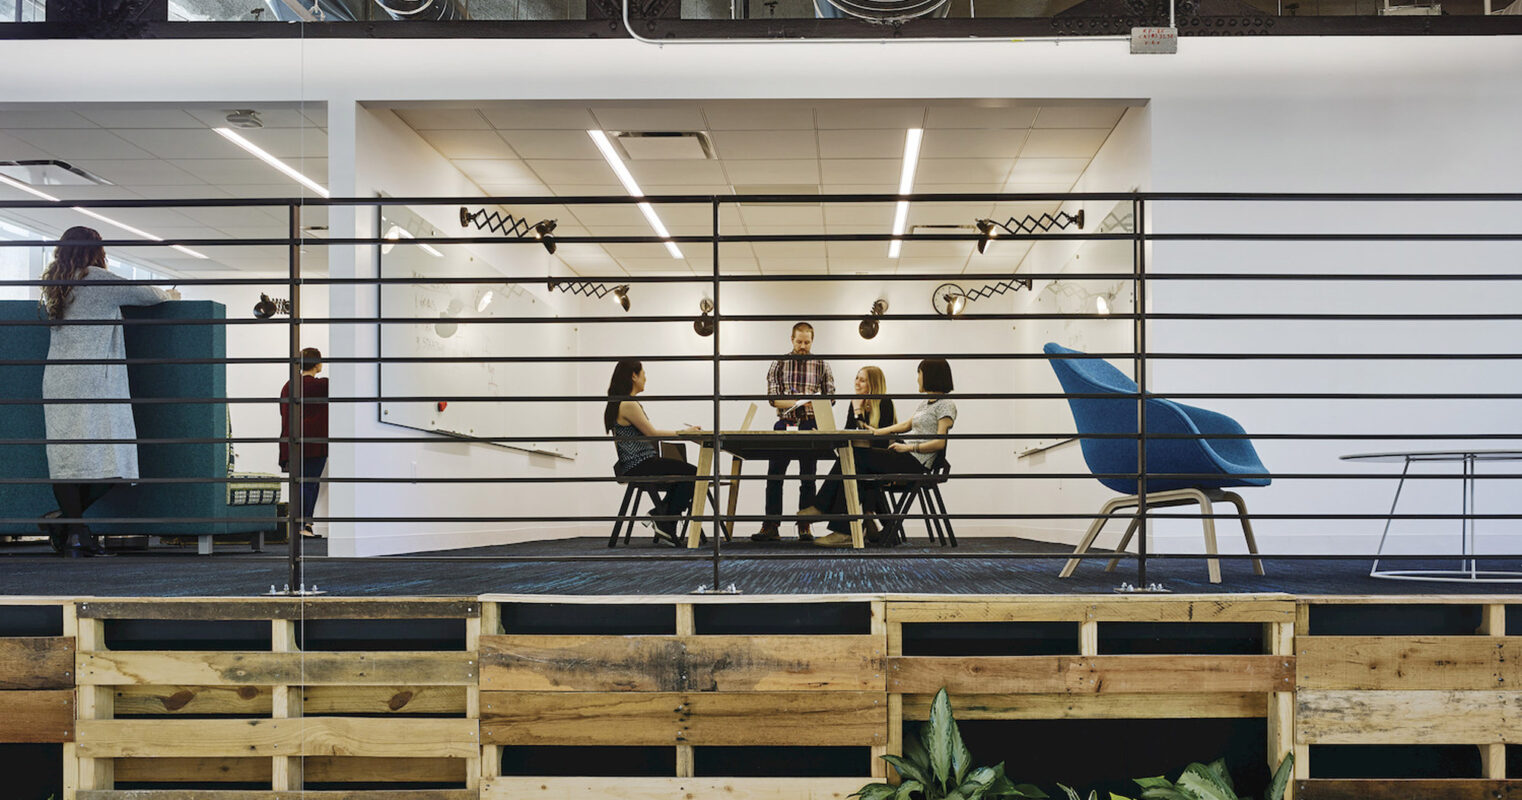 Modern open-plan office space featuring industrial aesthetics with exposed ductwork, natural wood pallet partition, pendant lighting over a sleek conference table, and vibrant blue chairs that add a pop of color to the neutral palette.